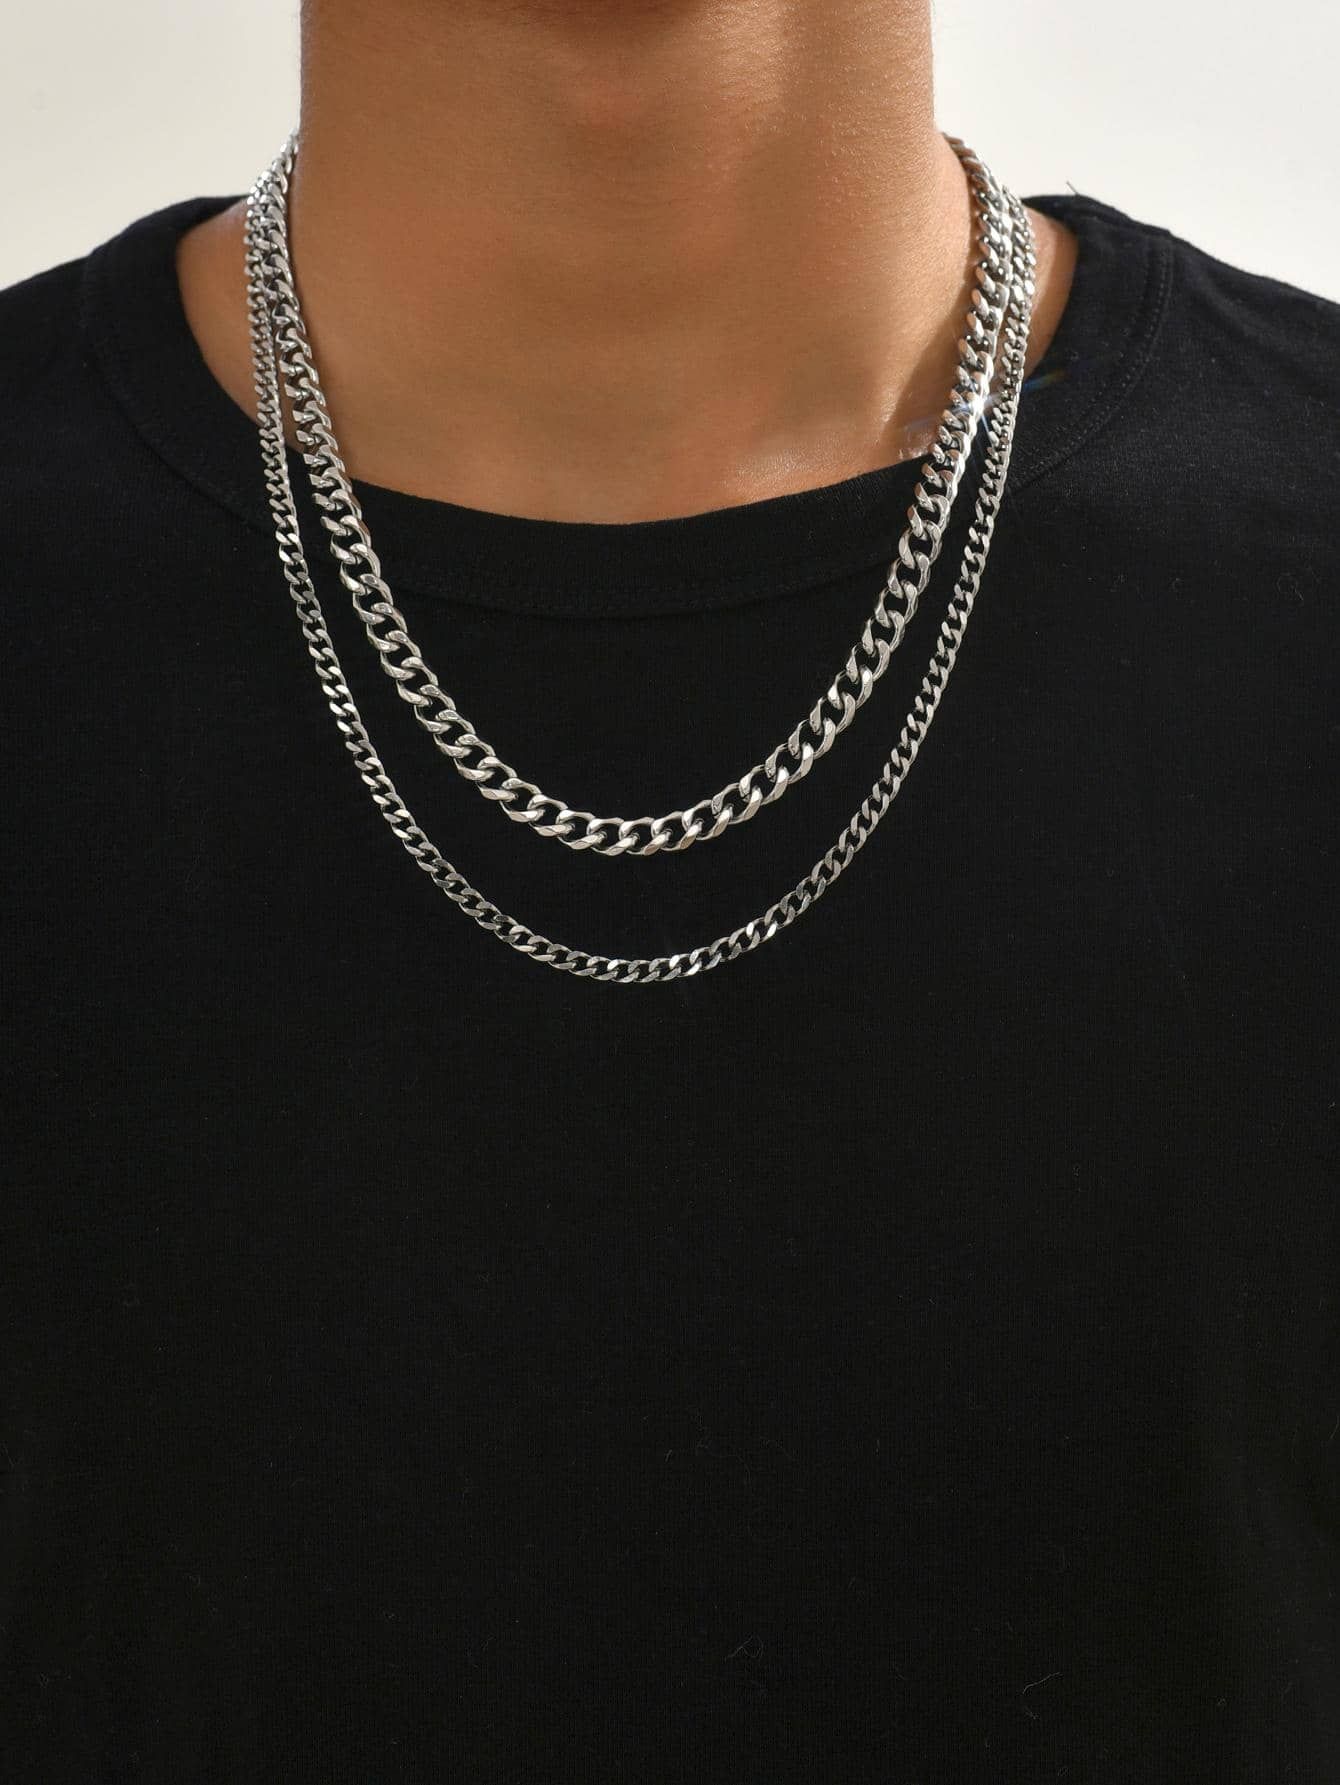 2pcs Hip-hop Men's Stainless Steel Chain Necklace | SHEIN